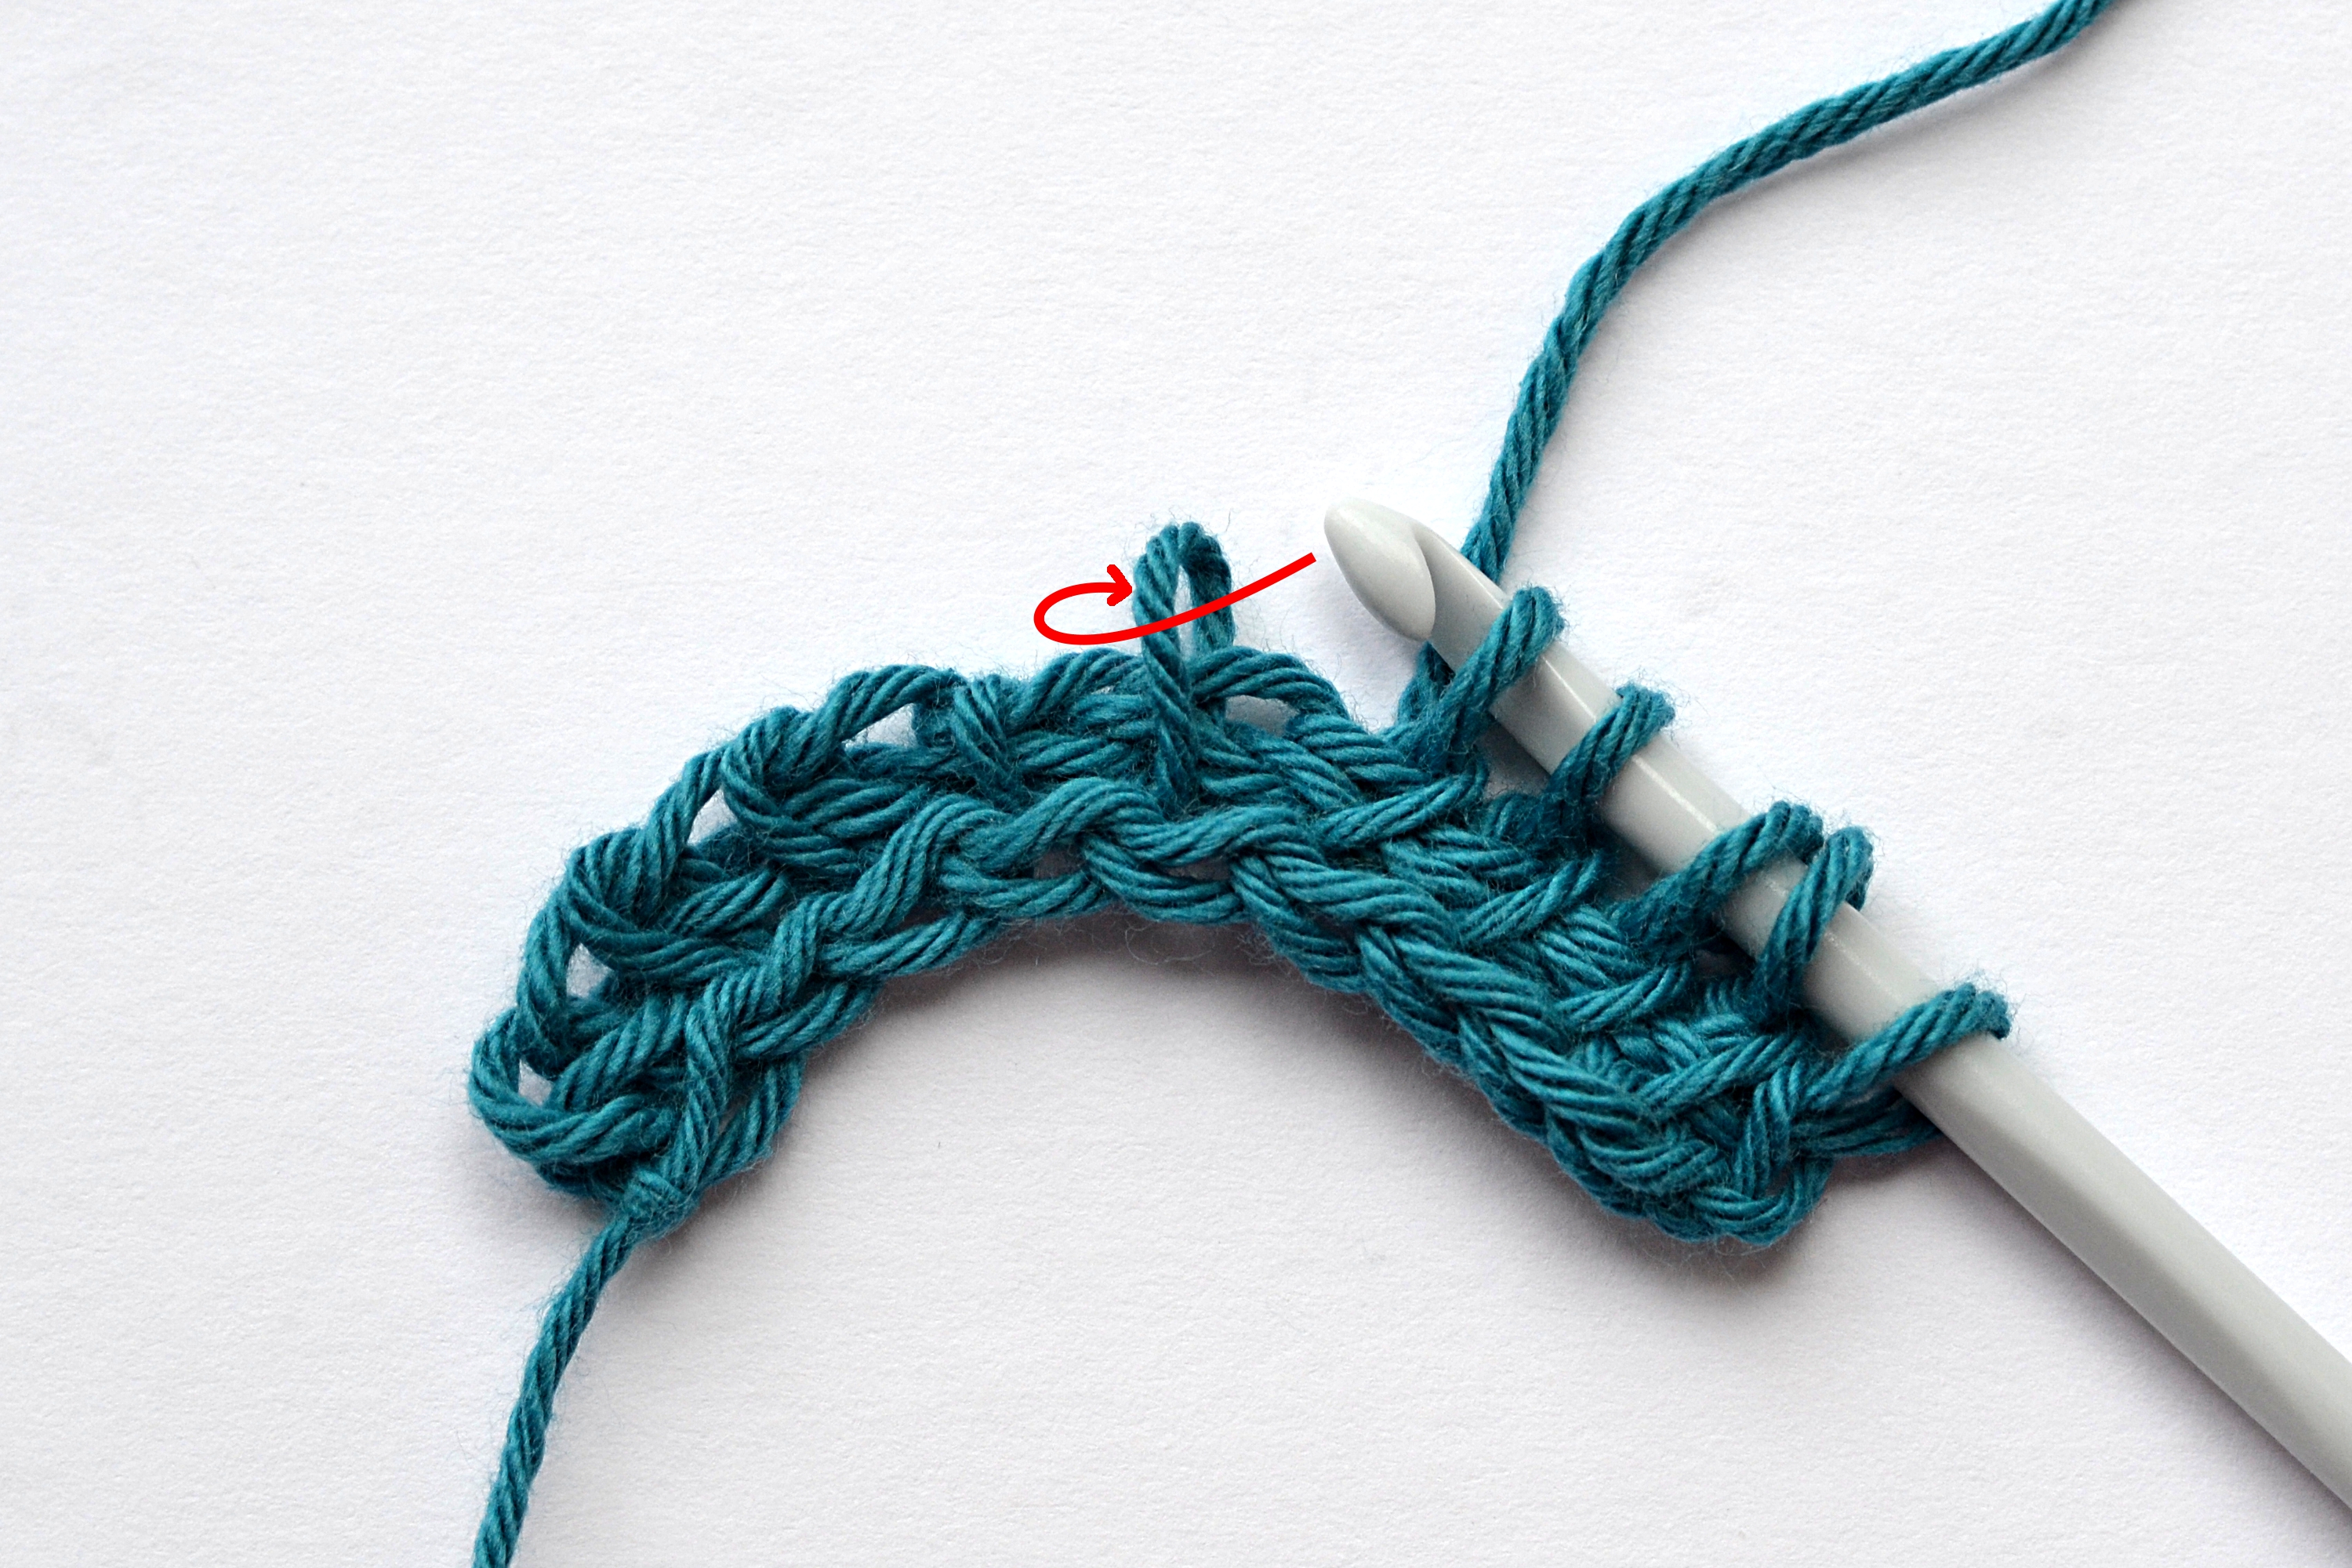 How To Crochet The Tunisian Simple Stitch - Crochet and Stitches